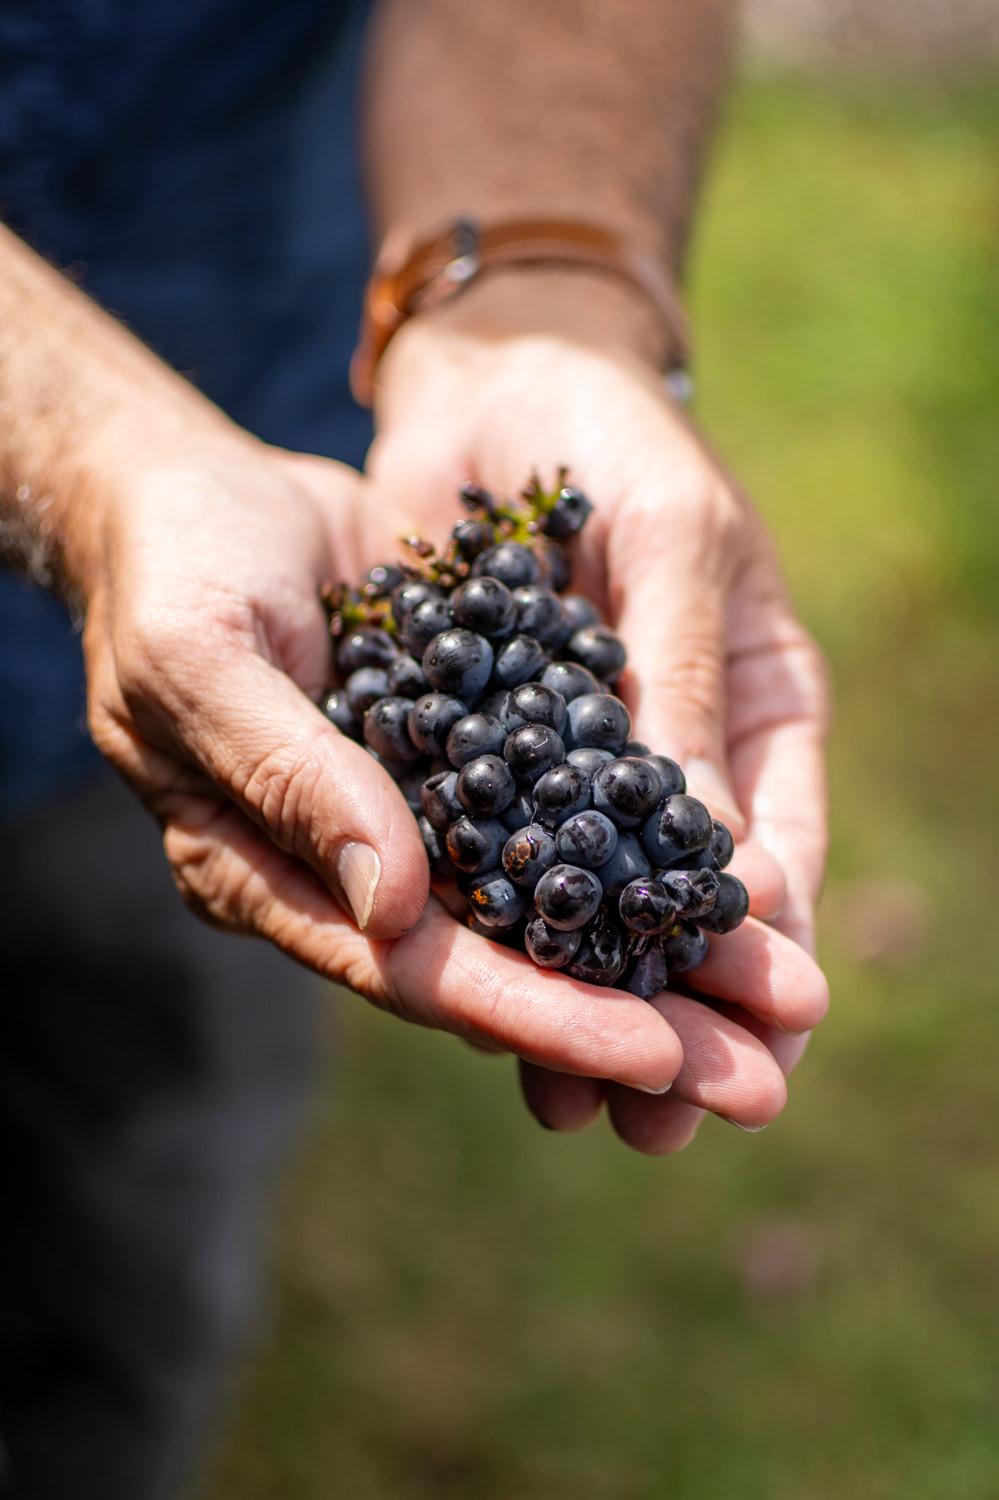 Hands holding a picked bunch of pinot noir grapes at the end of the growing season.